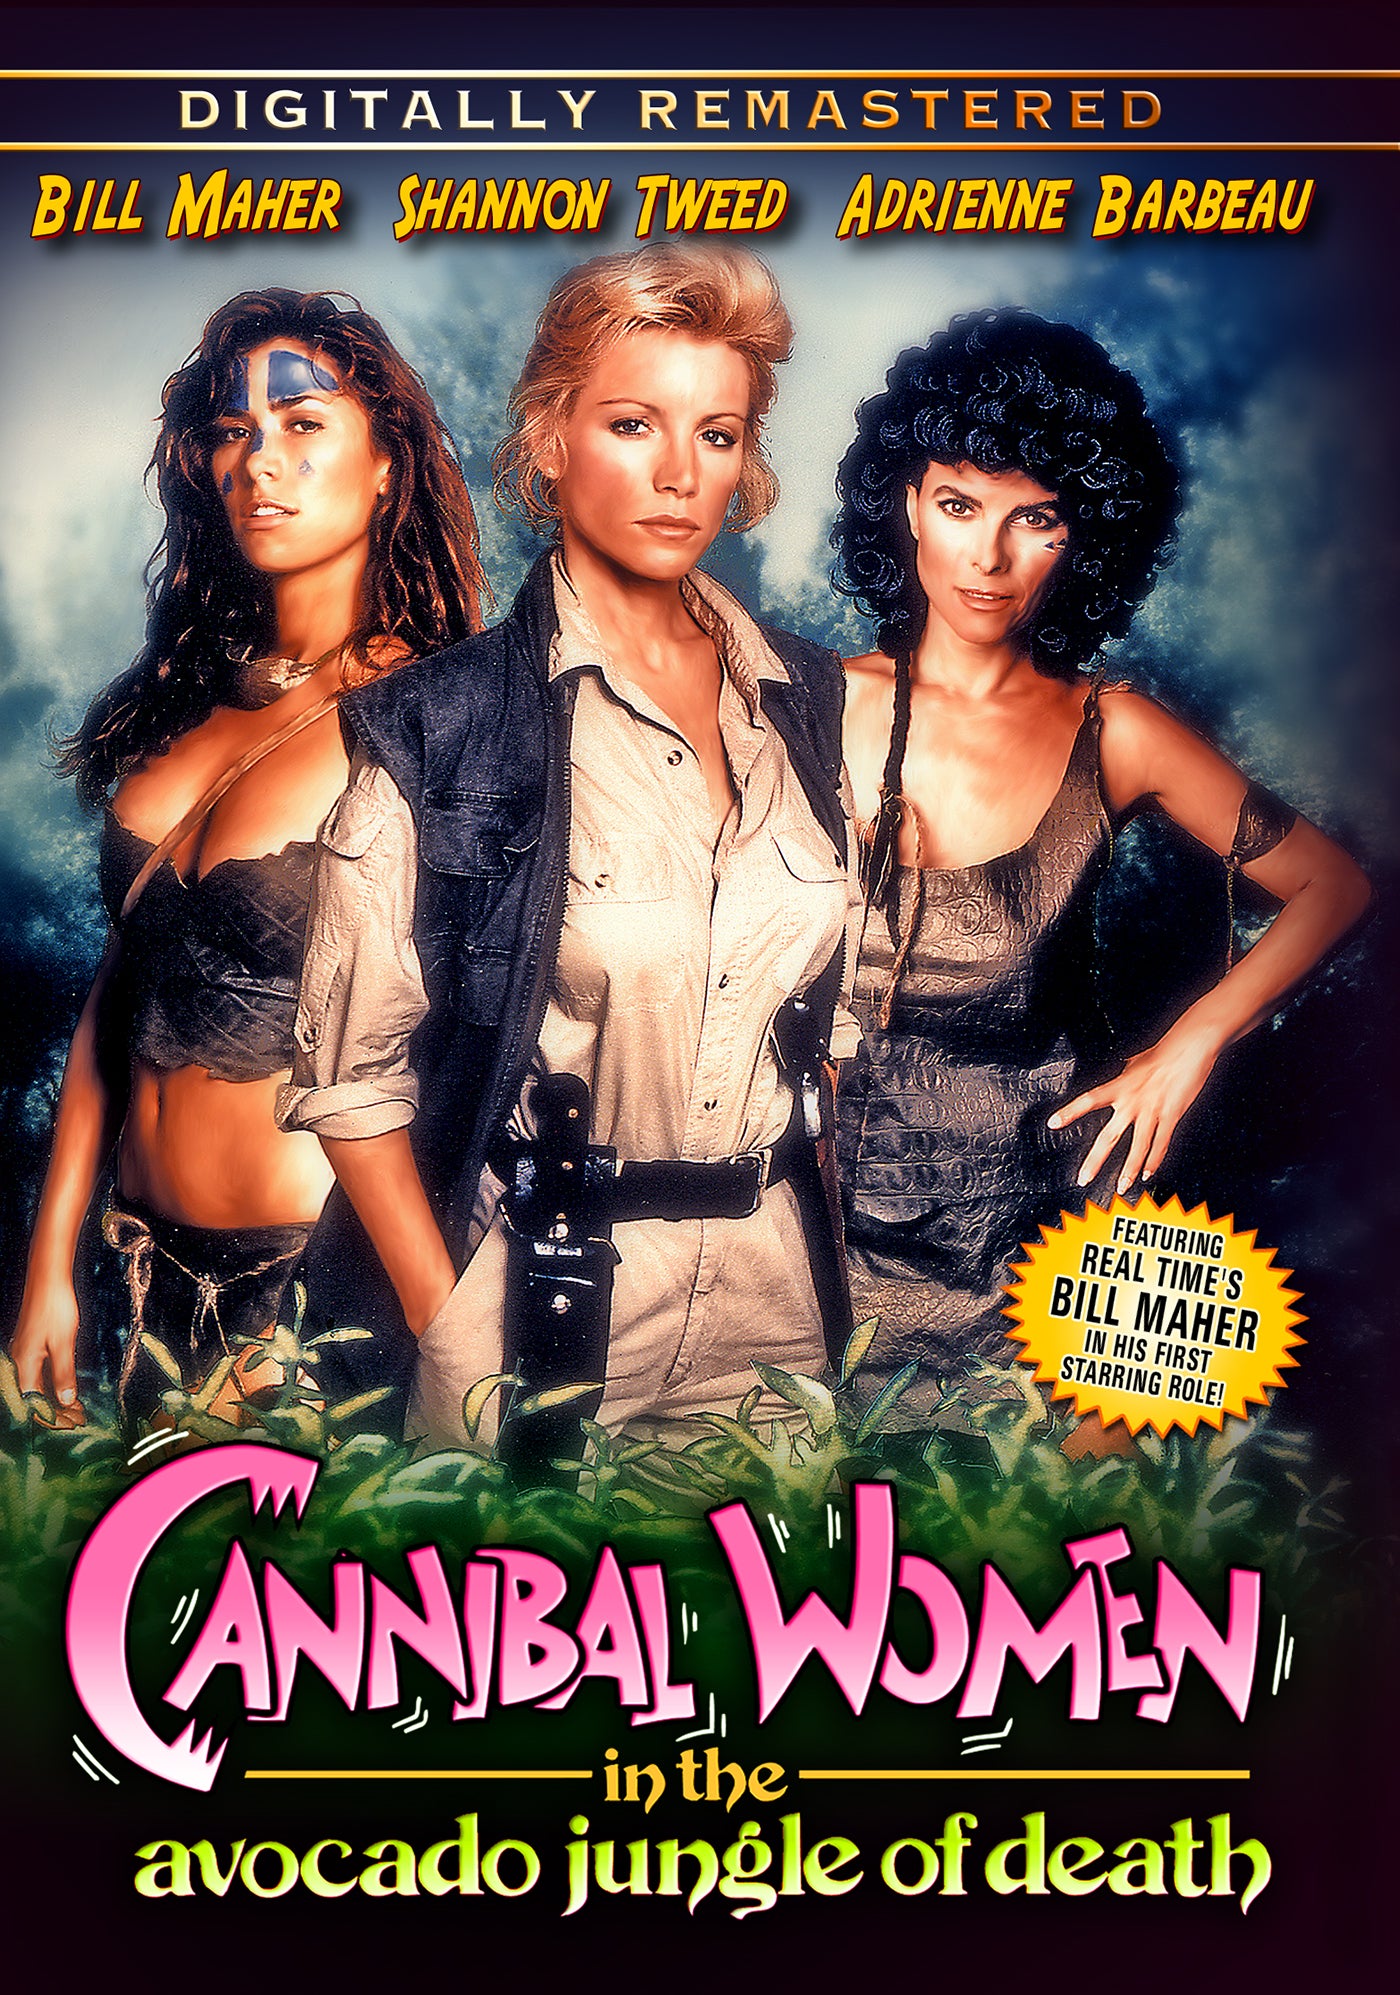 CANNIBAL WOMEN IN THE AVOCADO JUNGLE OF DEATH DVD